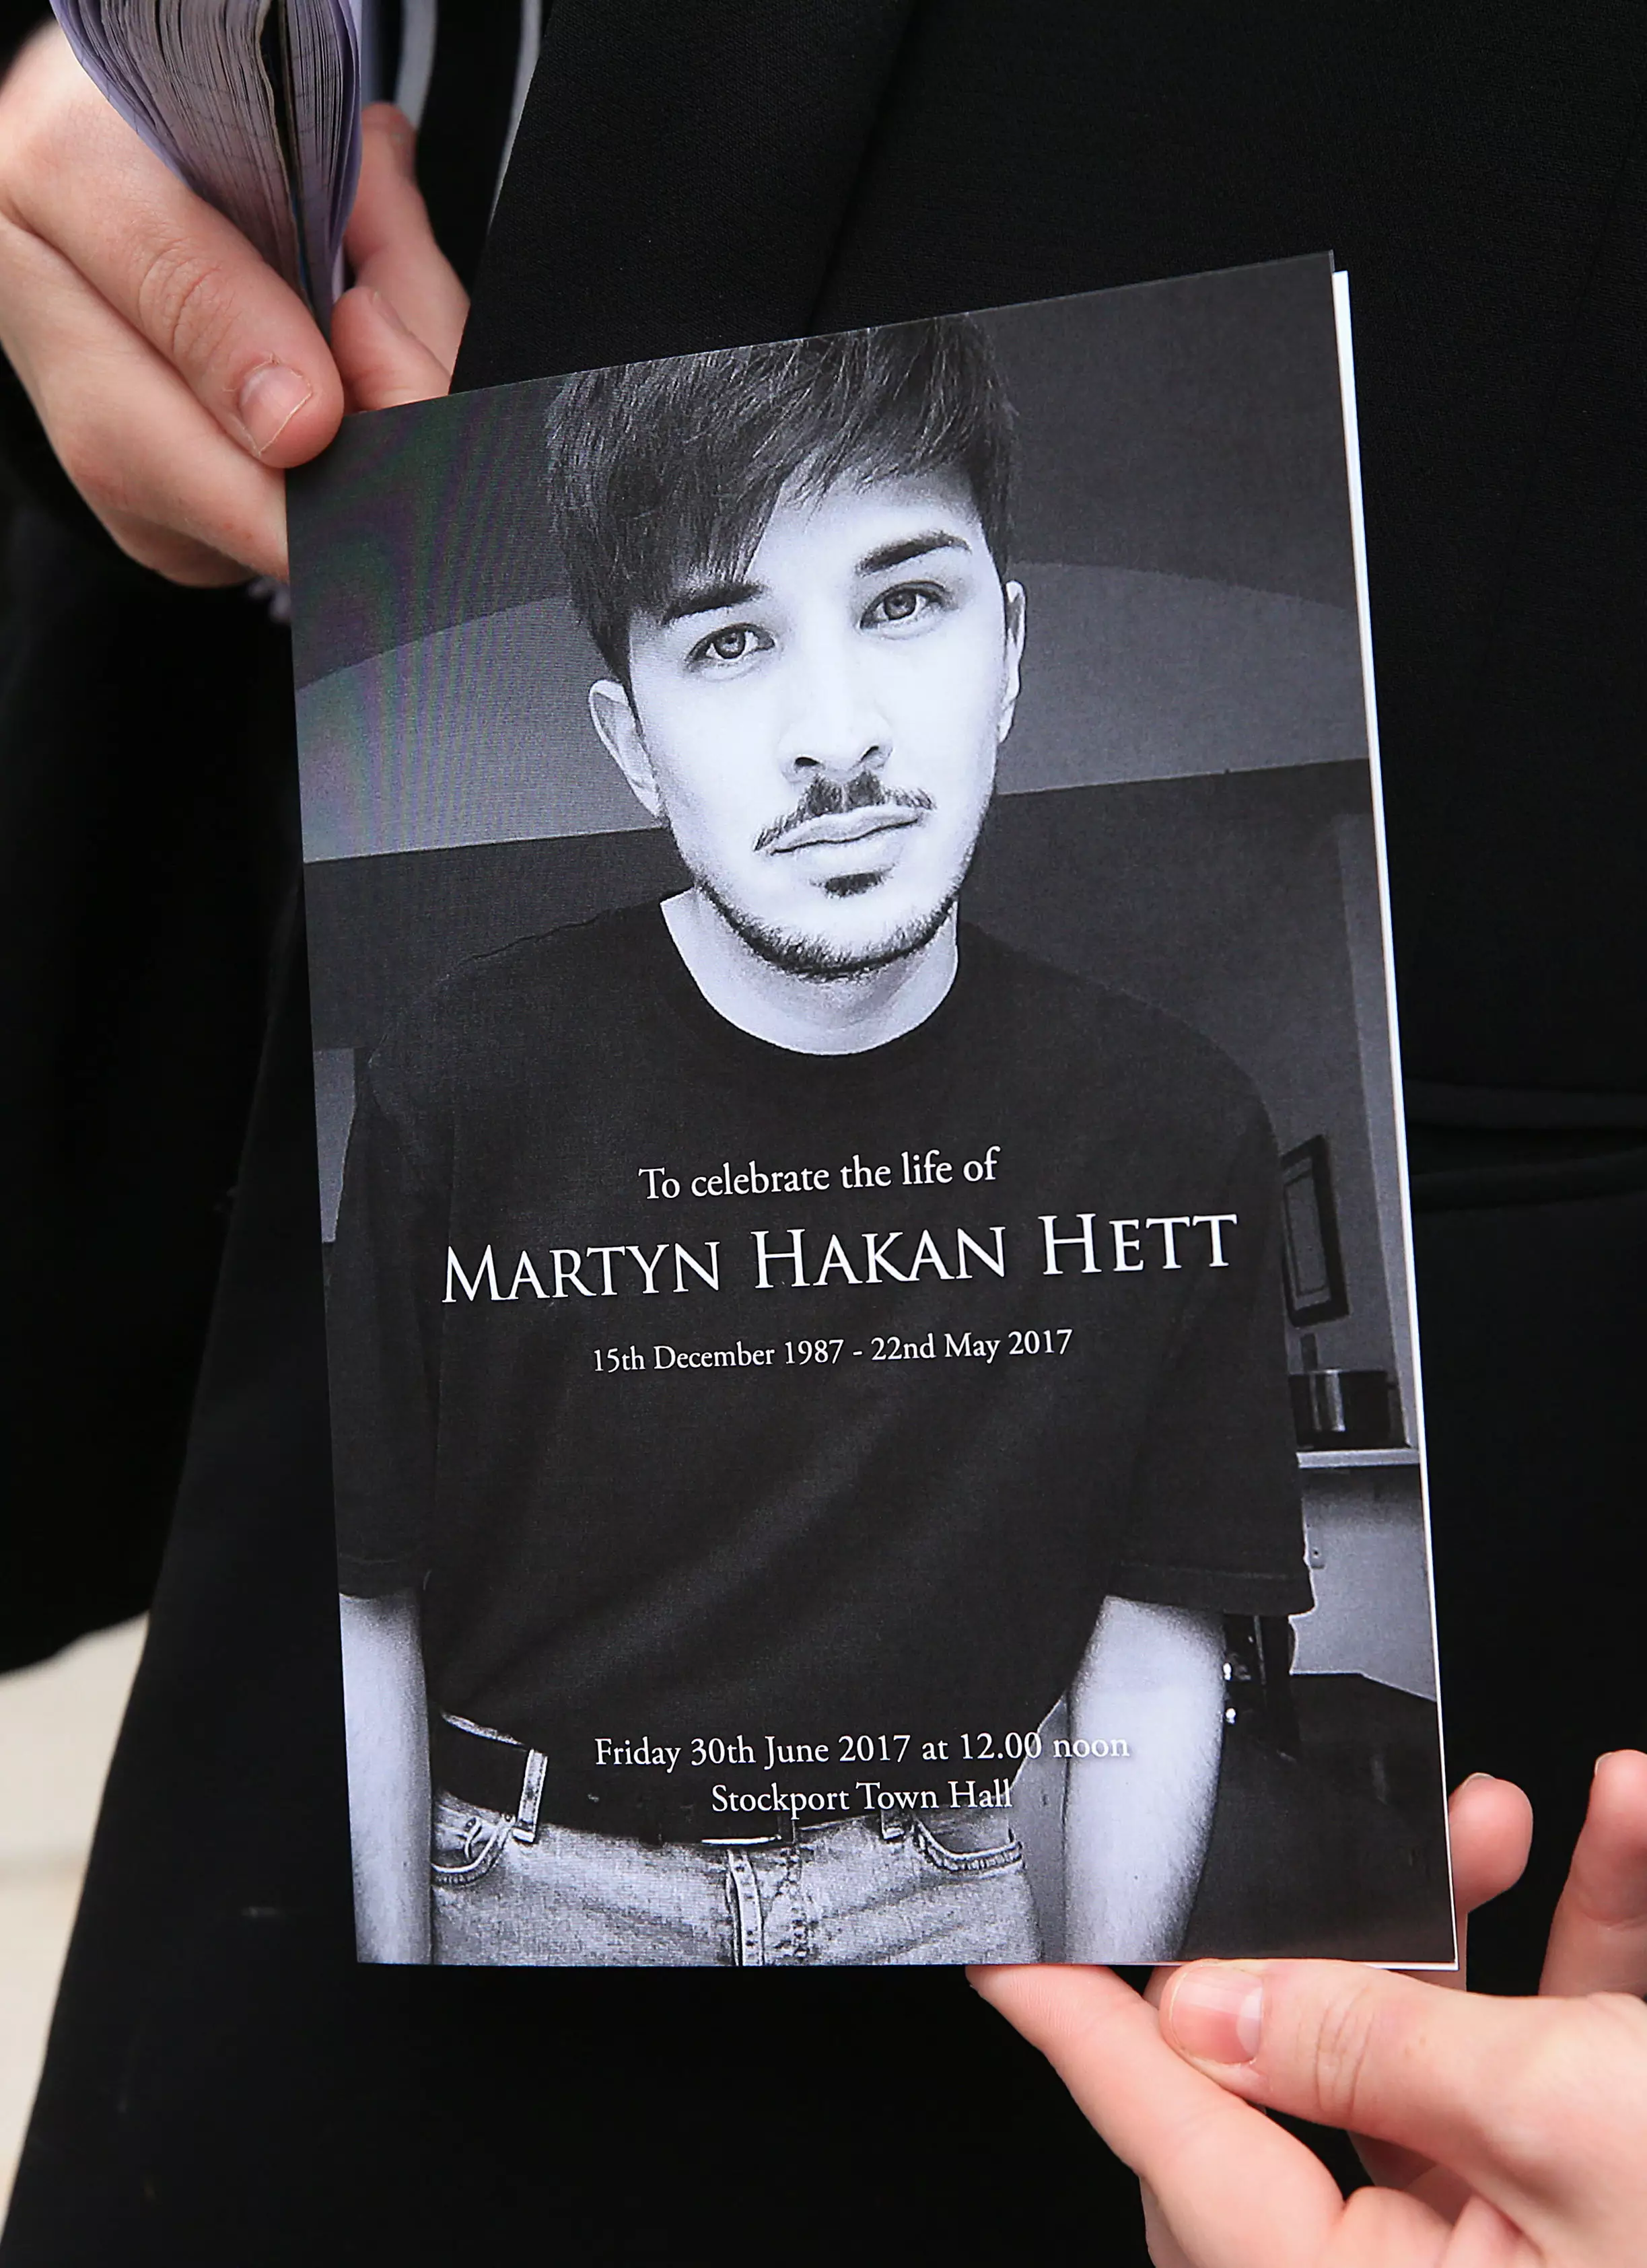 Martyn was one of those killed in the explosion.